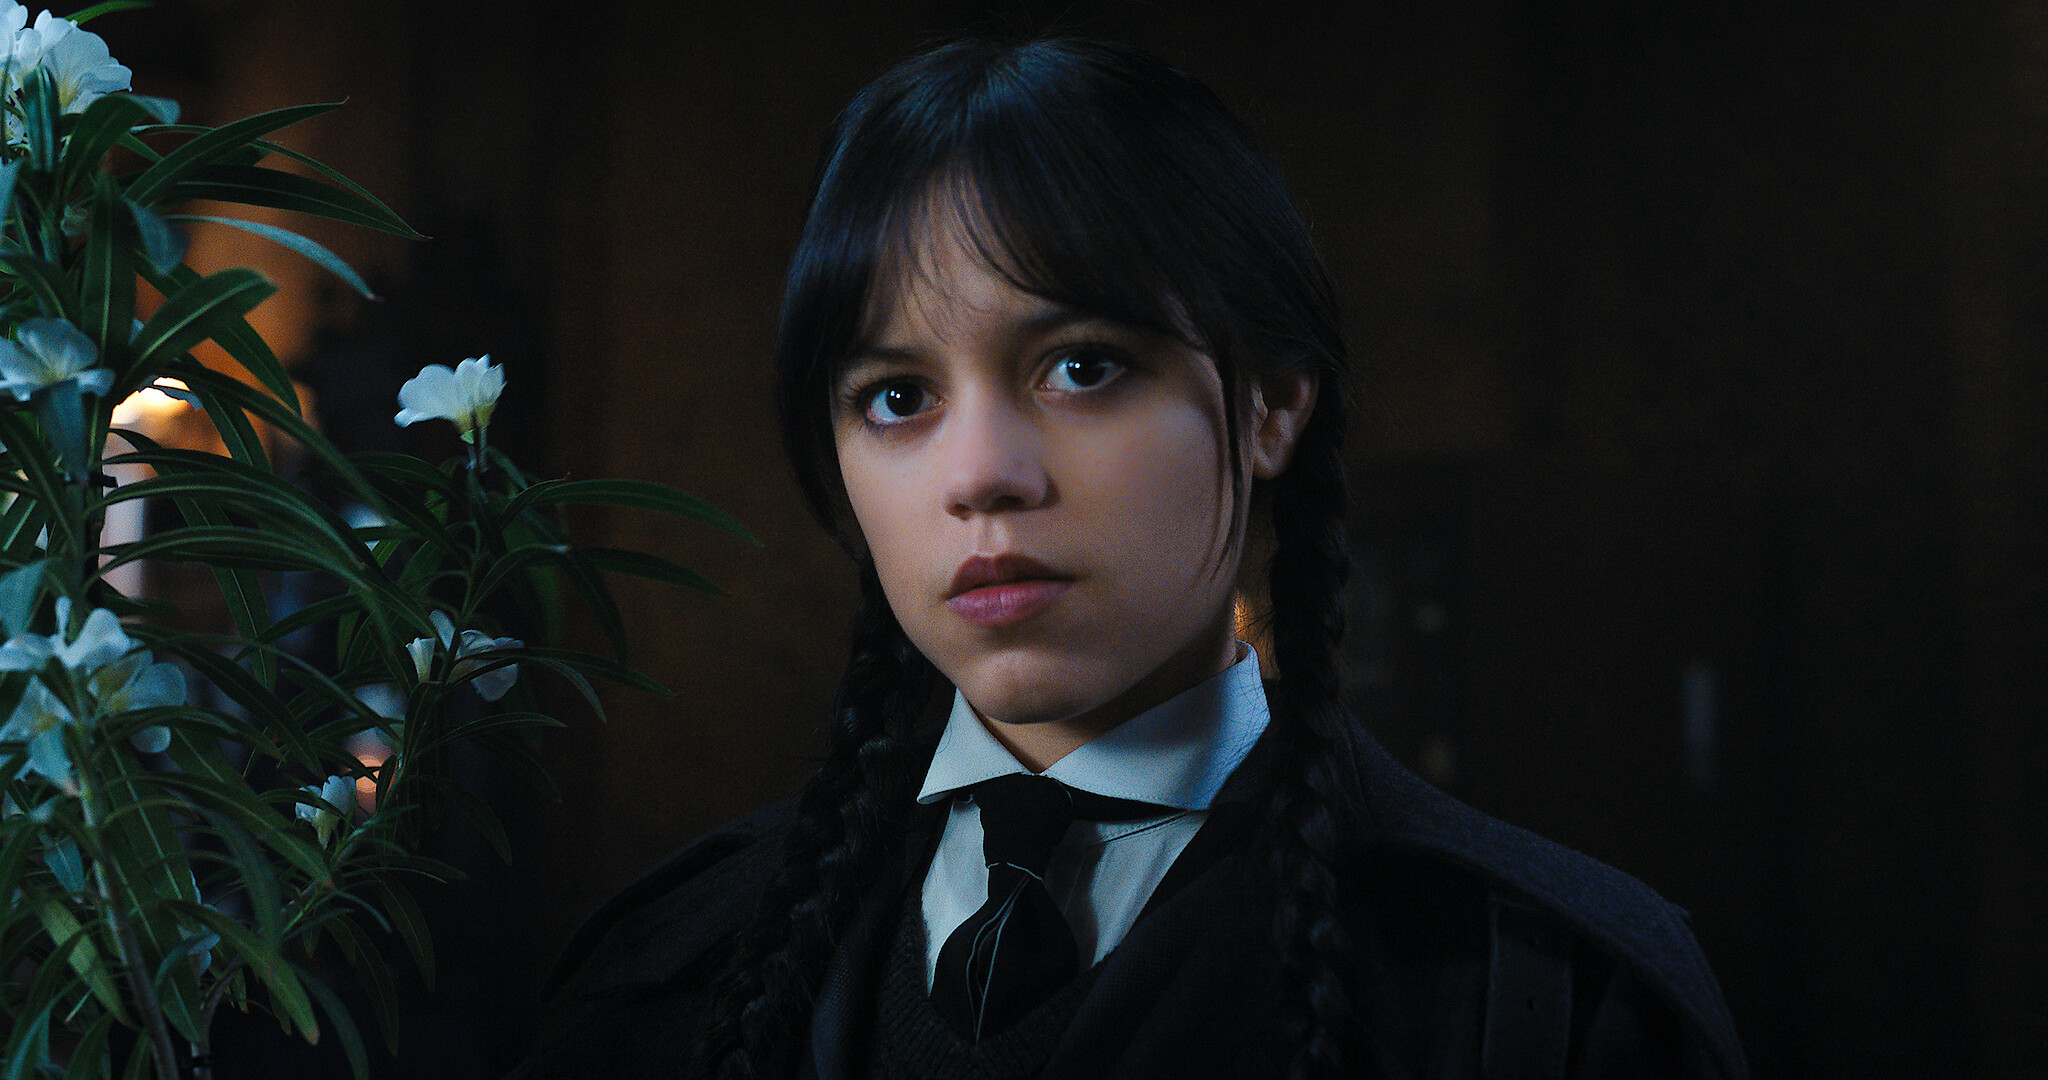 Here's how you can get the trending Wednesday Addams makeup look